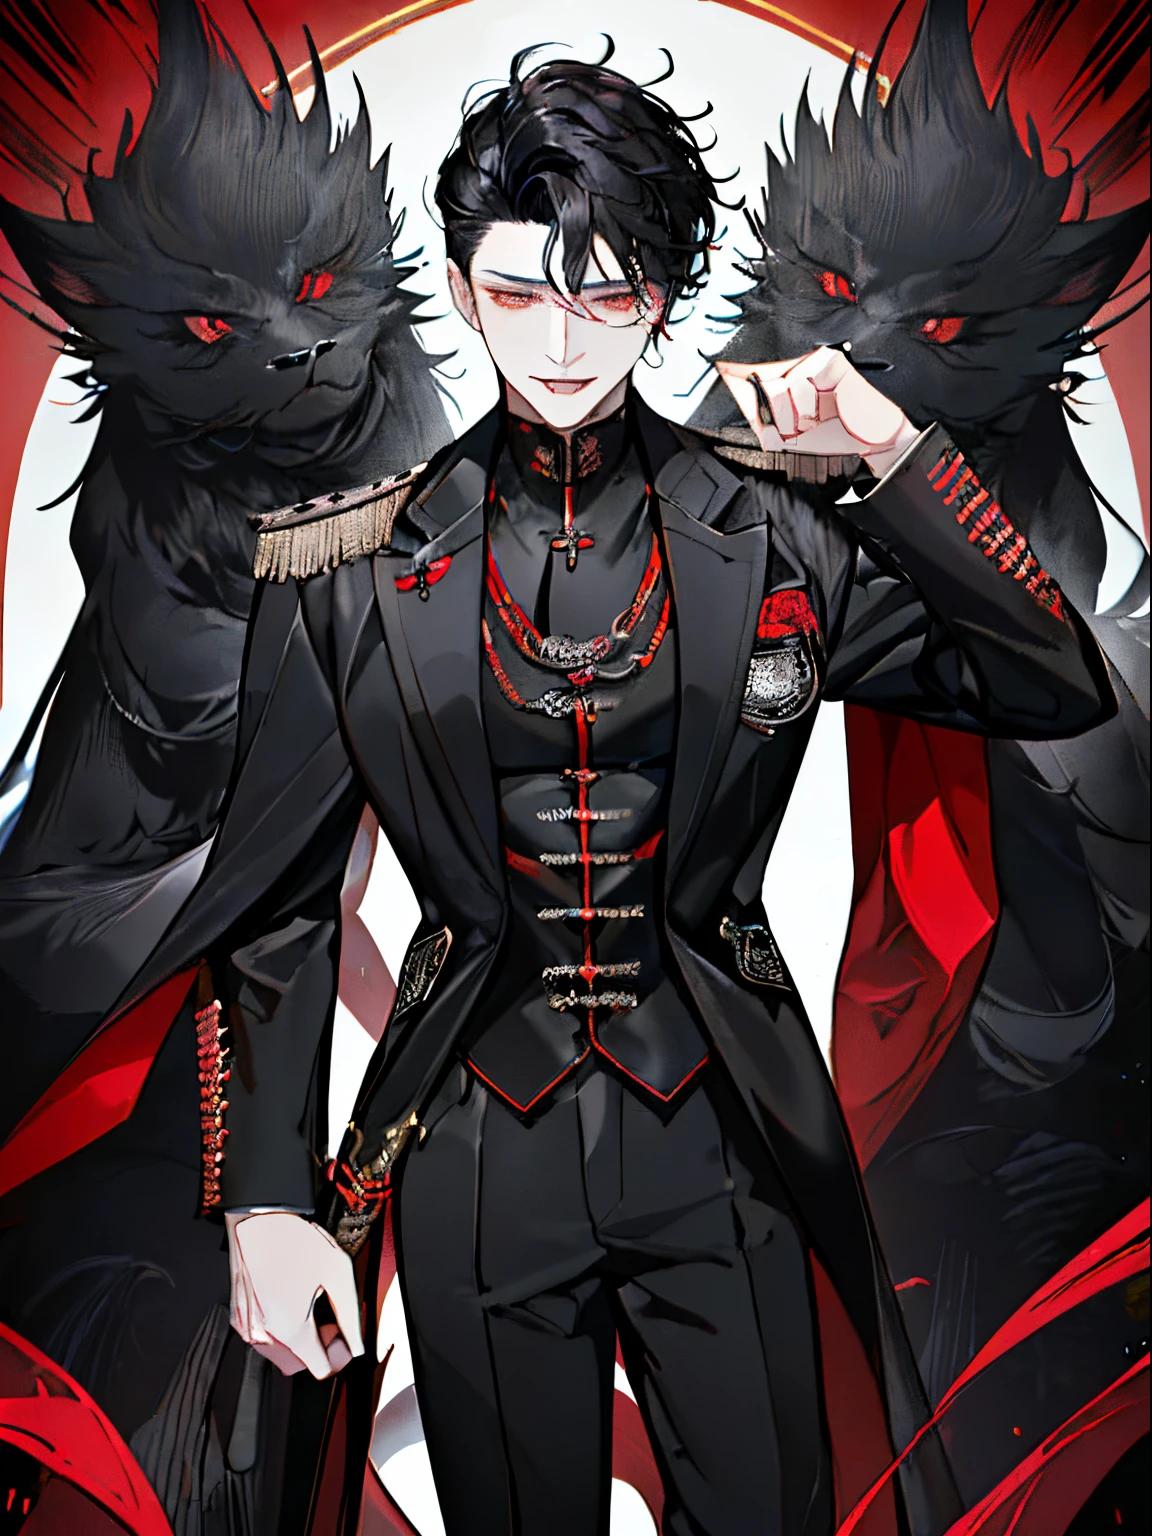 ((Black hair)),((curly fluffy hair)),((short-hair)),((pale red eyes)),(double sleeve long sleeve clothes),((())),((Black leather corset)),((Luxury and neat attire like a British gentleman)),((Feeling of fatigue and weakness)),Slight red tide,(Stare at me with your mouth open),(Vampires),((long fangs)),(Yodare),(Kamimei),(((Super close-up of the face))),((Cute mascot-like black creature)),(Extra large full moon night),((Sharp eye light)),((Snake-like eyes)),((Male in his mid-teens)),smiling slightly